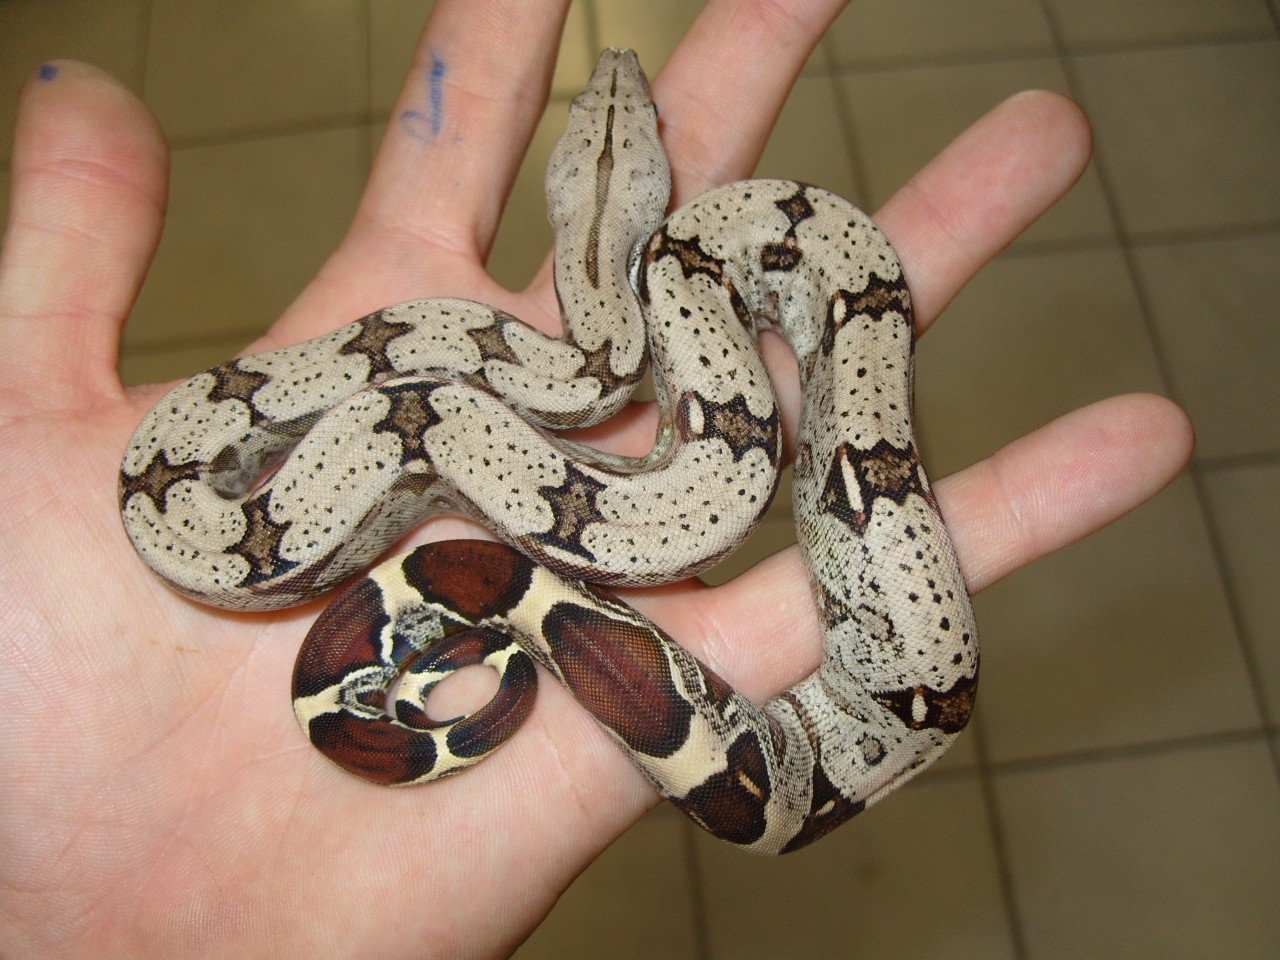 Suriname Red Tail Boas for sale1280 x 960